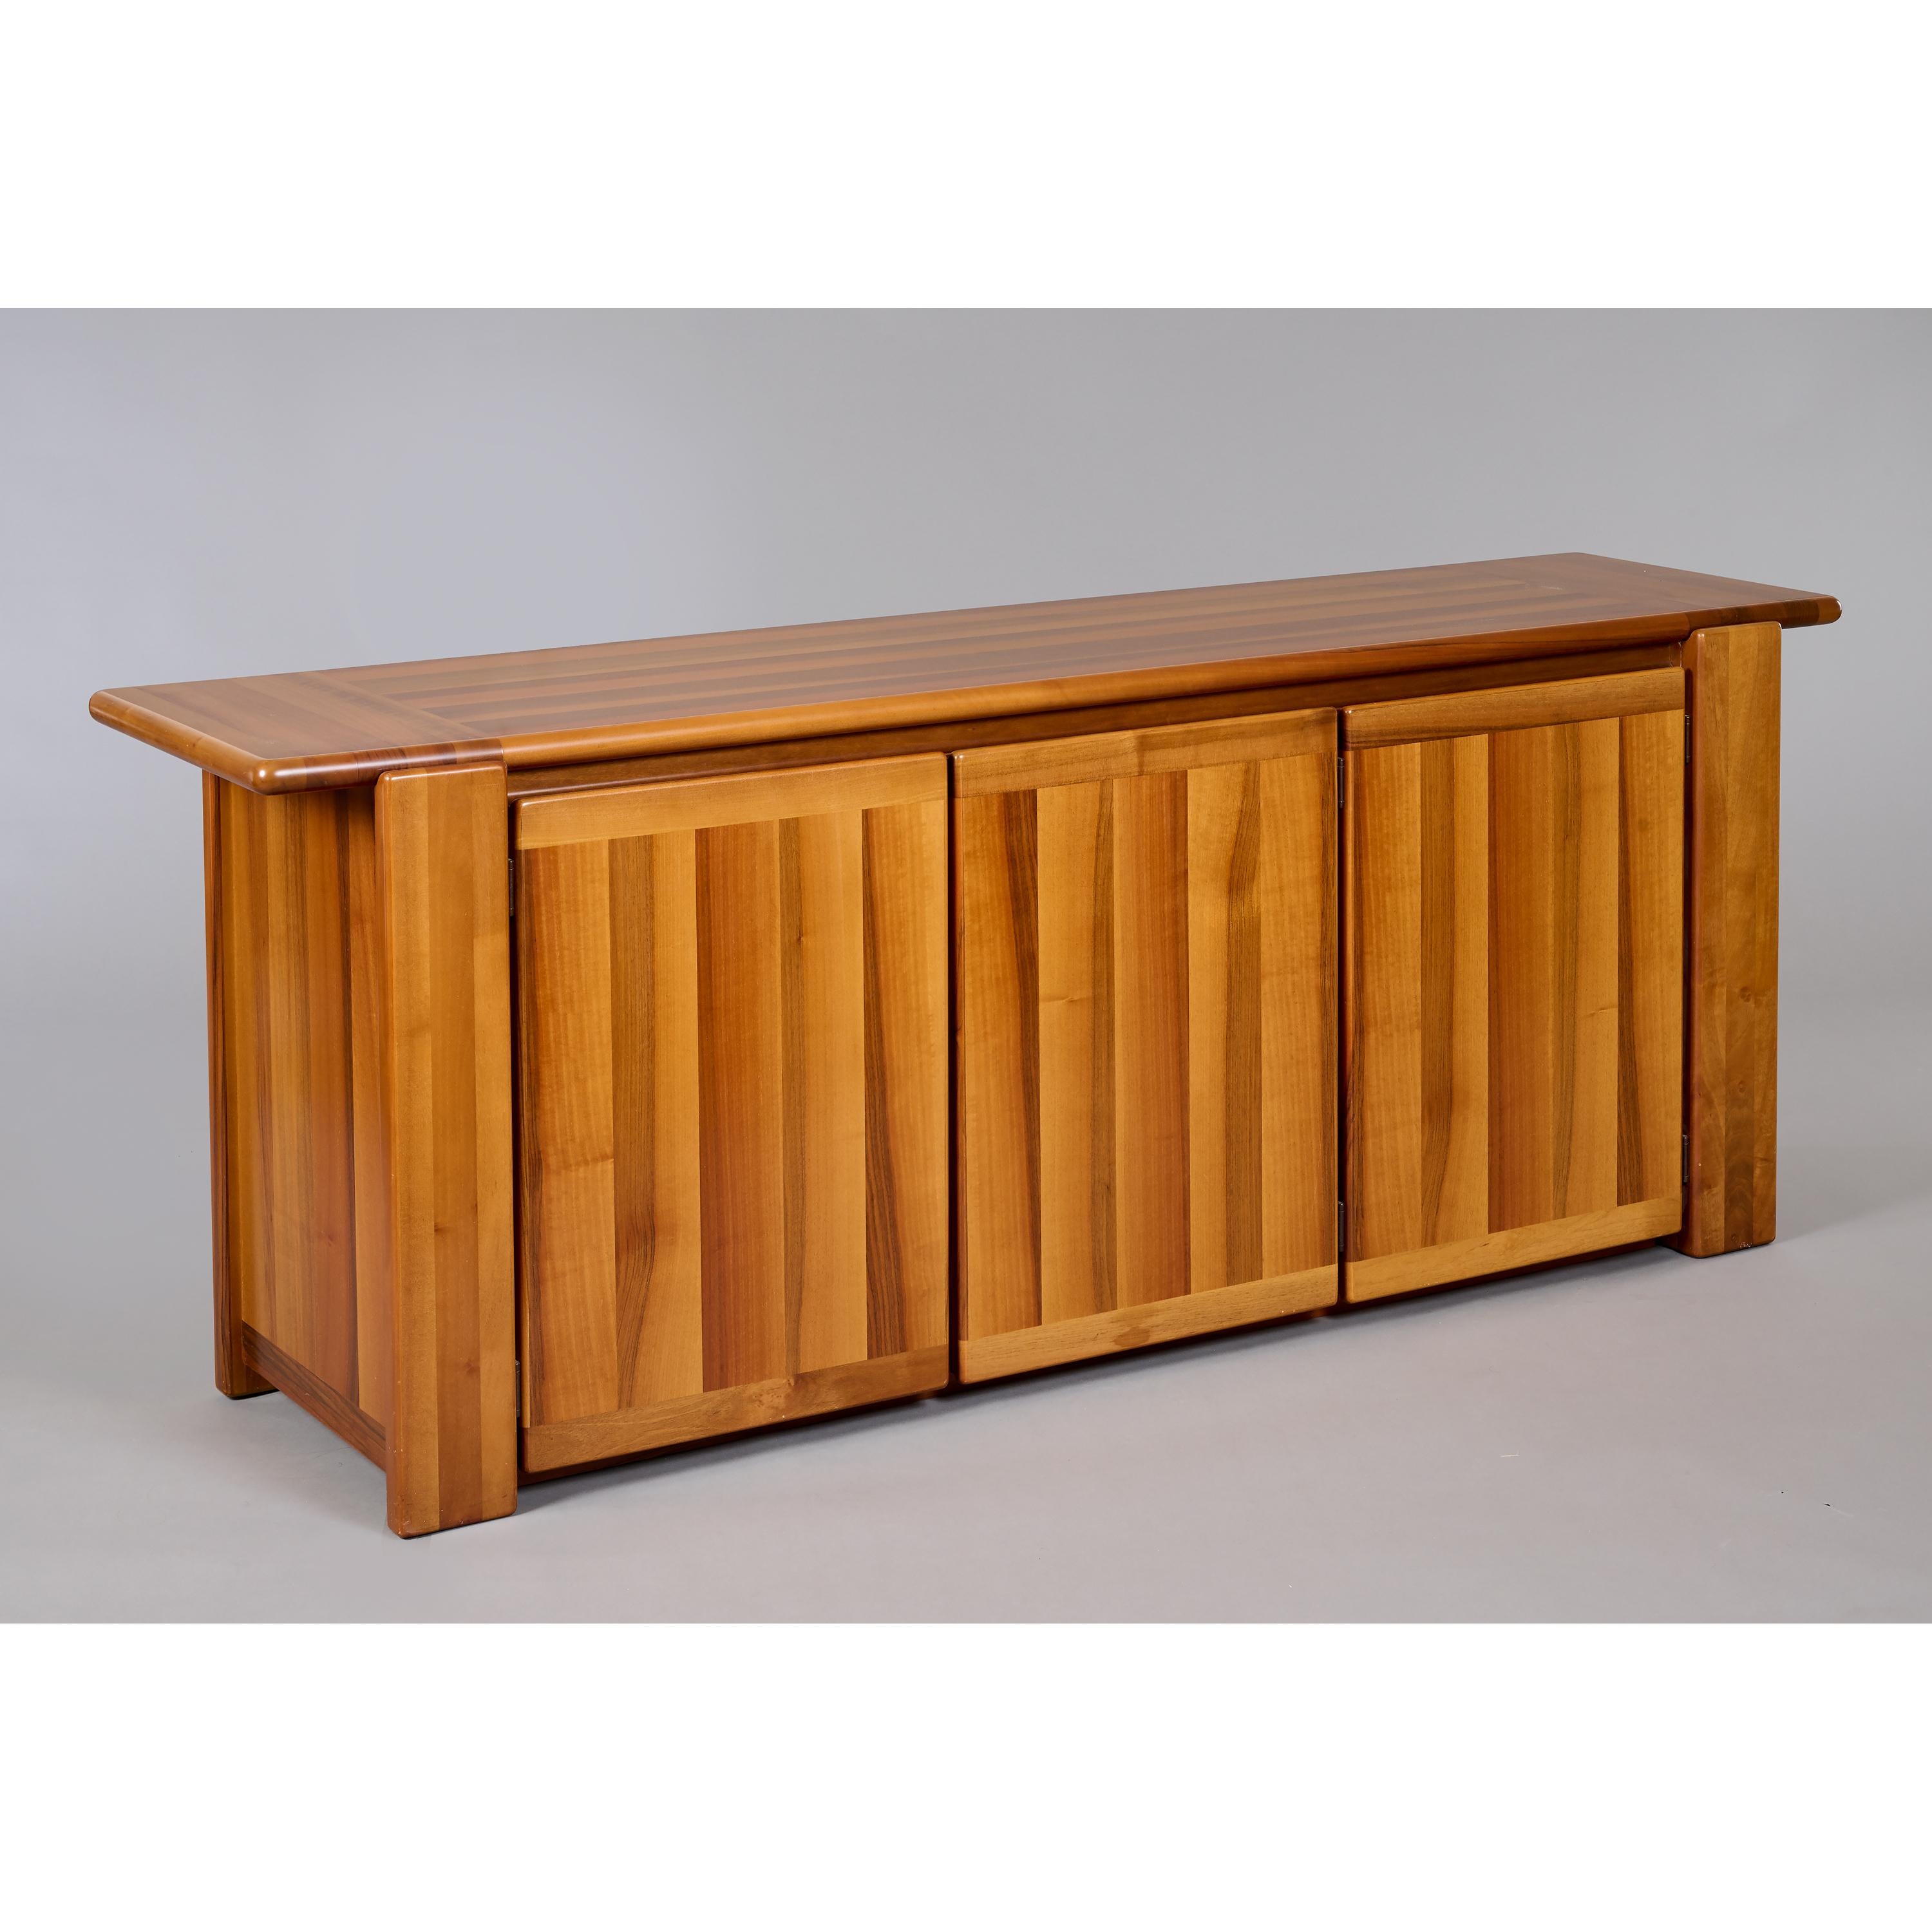 Italian Cabinet in Polished Walnut, Itso Pierre Chapo, Italy 1970s For Sale 5